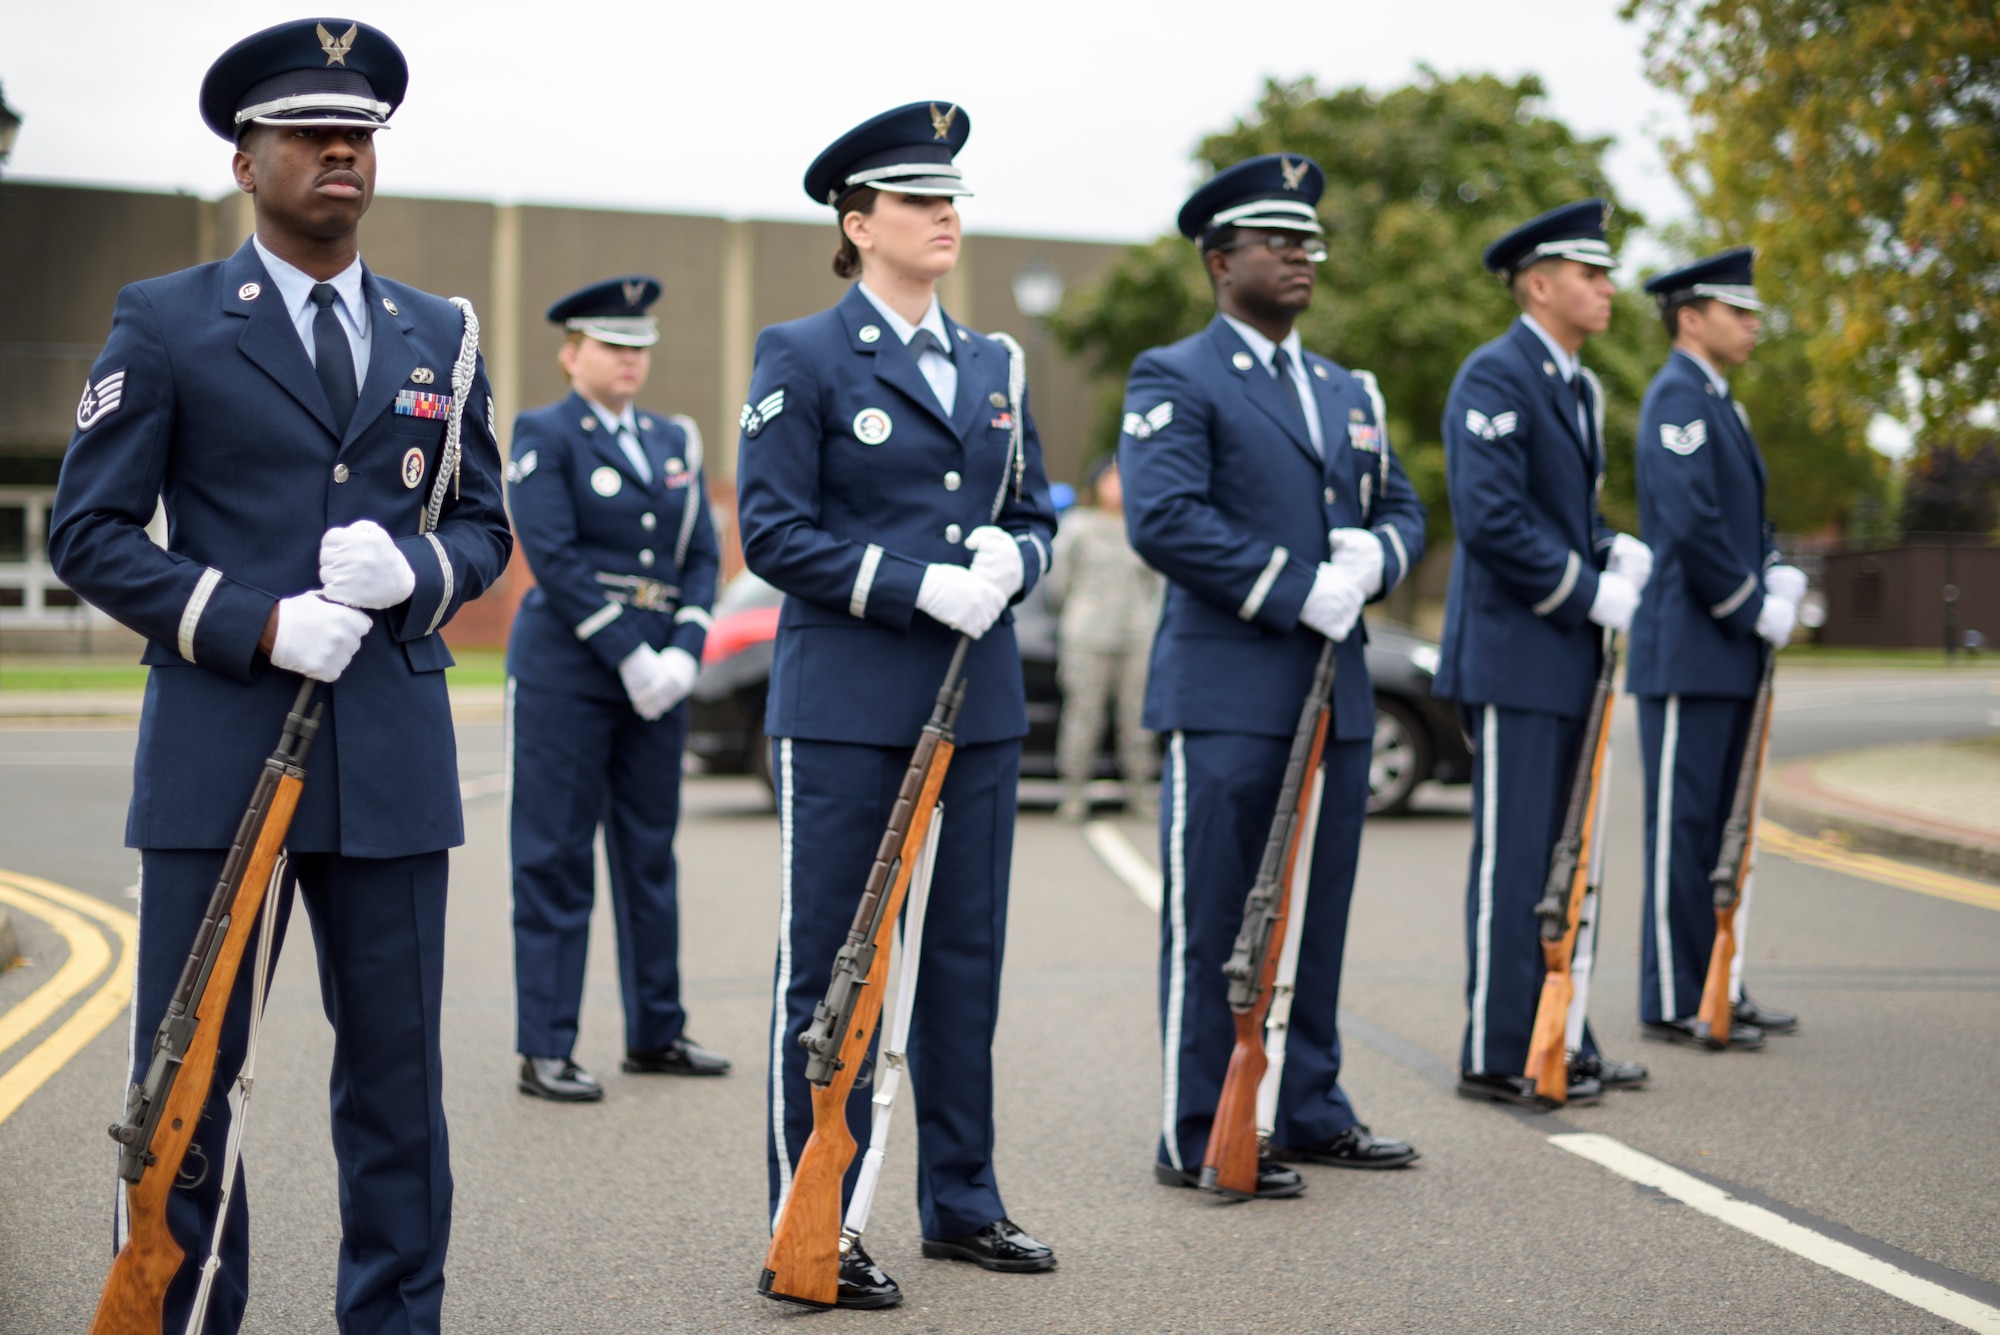 The Team Mildenhall Honor Guard stands by during a 9/11 ceremony at RAF Mildenhall Sep. 11, 2018. Leadership from RAF Mildenhall and RAF Lakenheath attended the ceremony, which marked the 17th anniversary of the Sept. 11 terrorist attacks. (U.S. Air Force photo by Tech. Sgt. Emerson Nuñez)